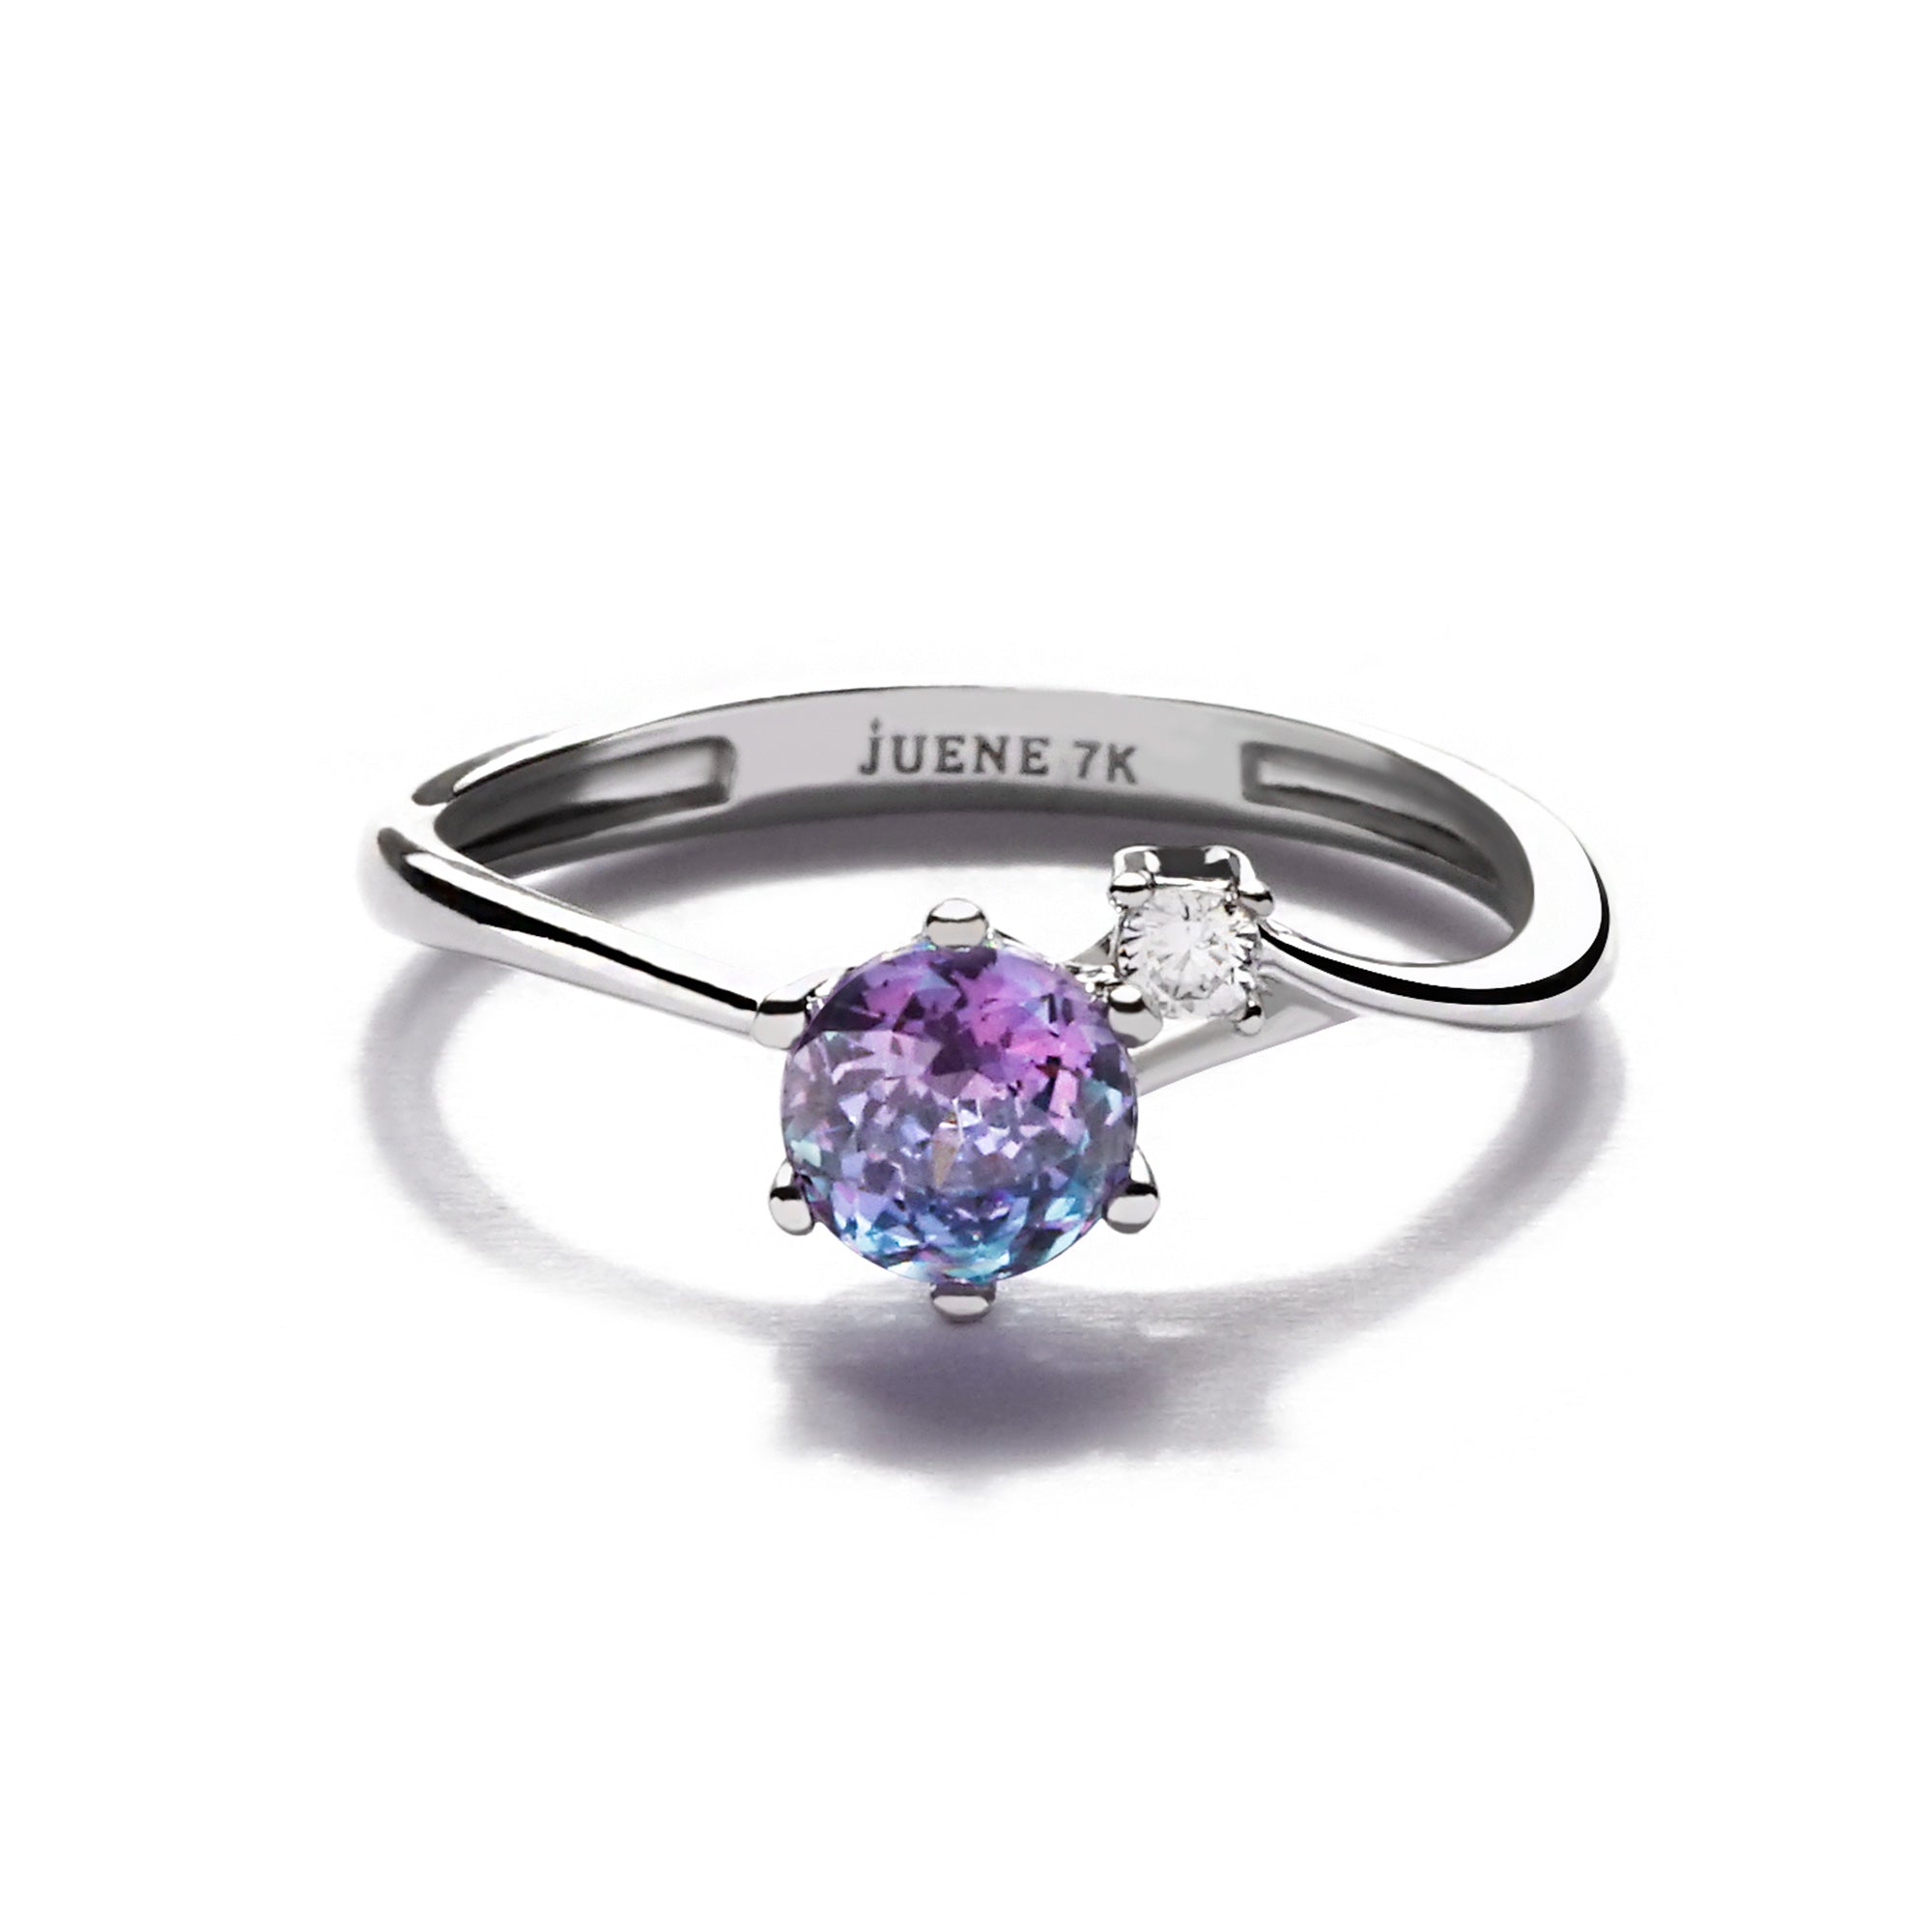 Afina Gold Ring - Under Thse Sky - Juene Jewelry